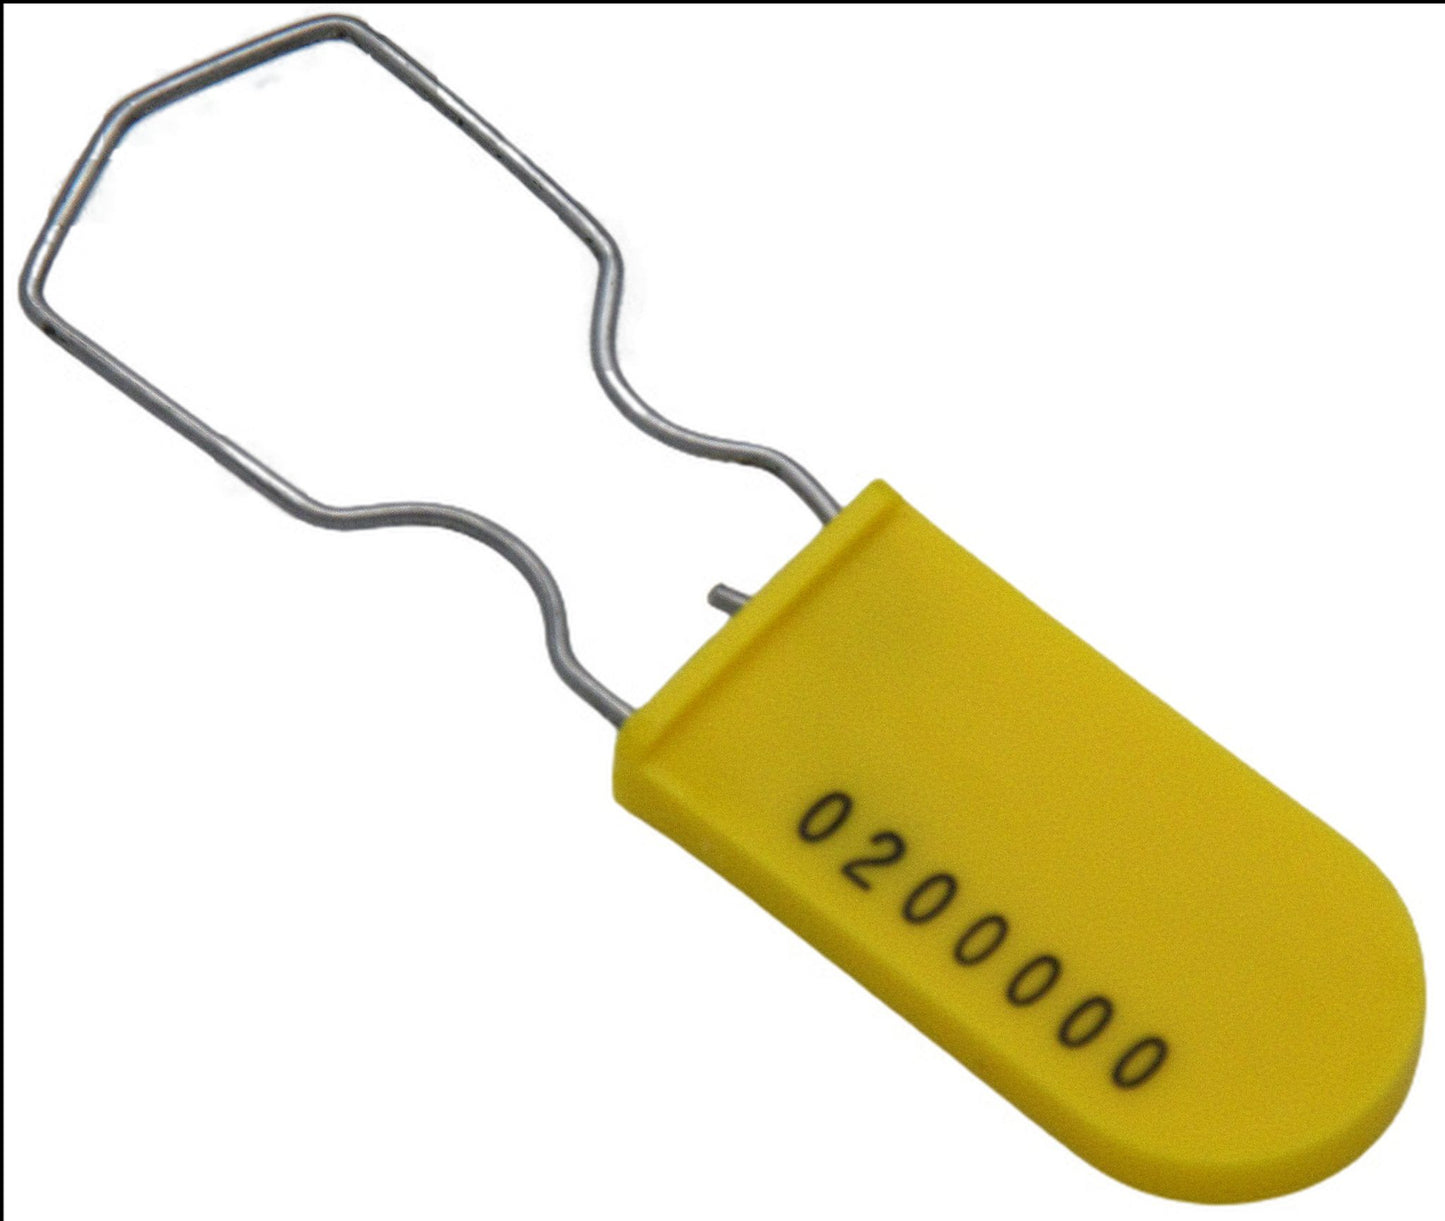 High Security Padlock Lockout Seal Large Shackle Pack of 50 Yellow